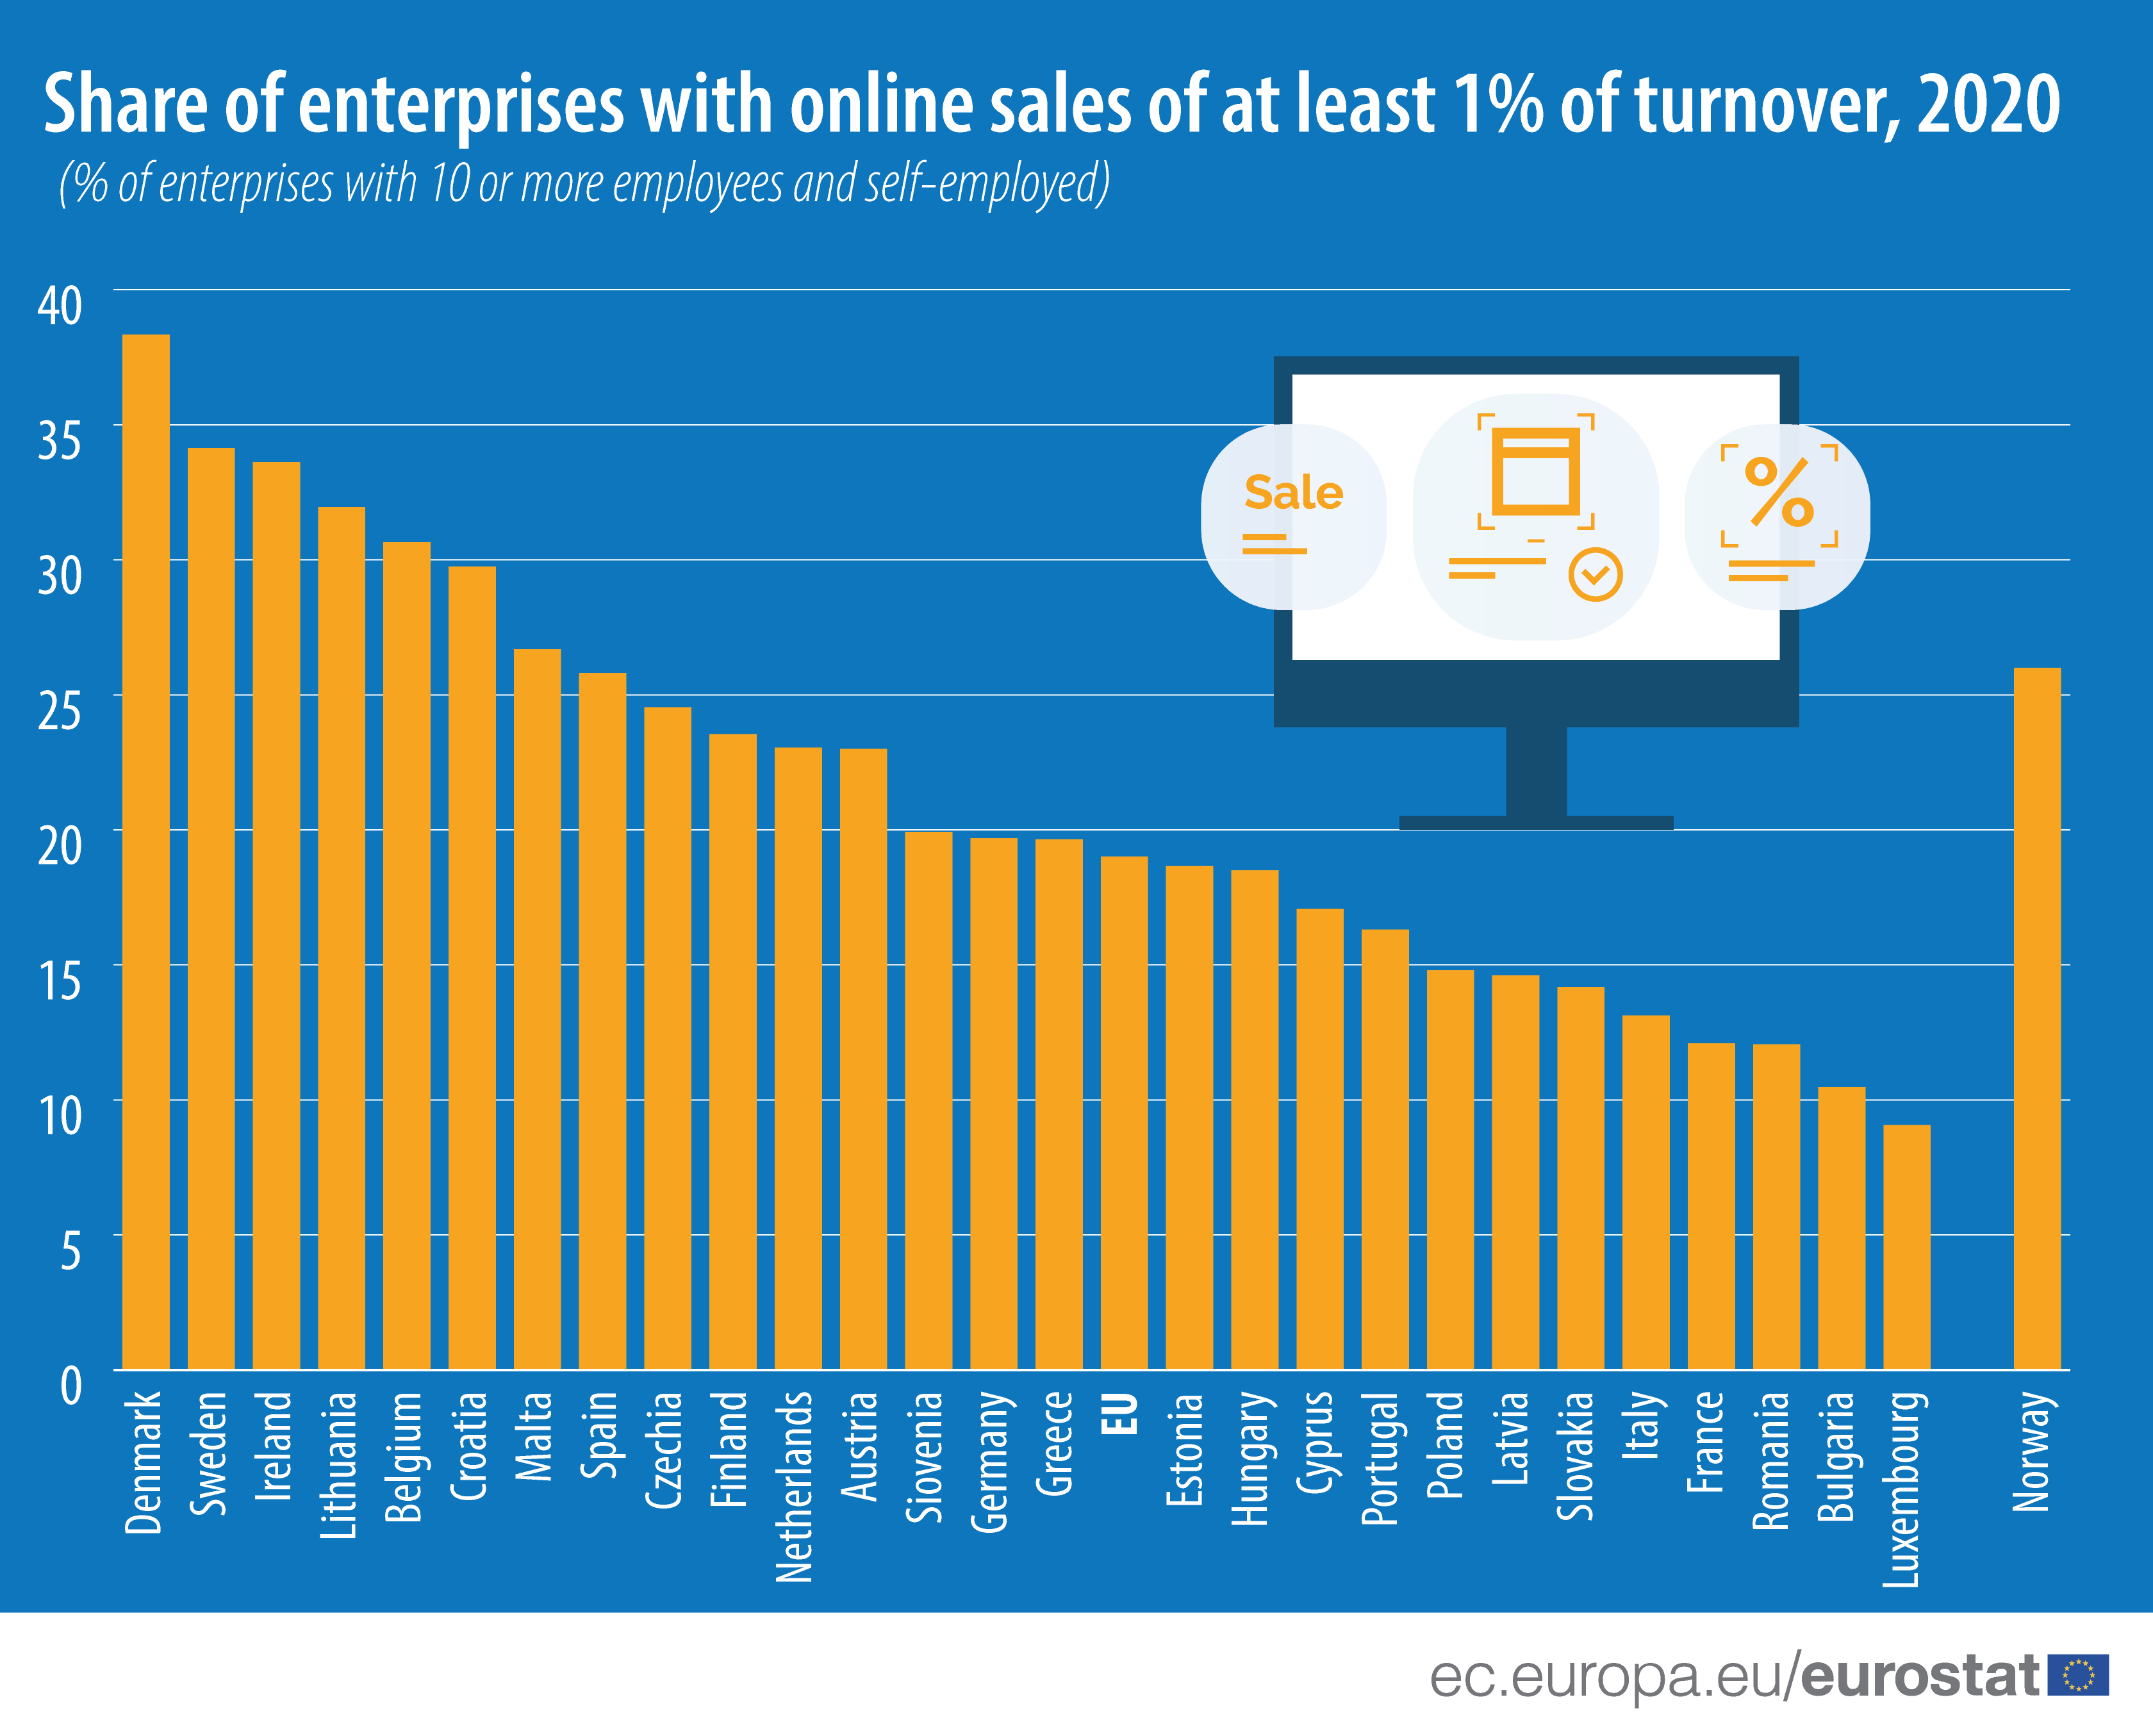 Bar chart: Share of enterprises with online sales of at least 1% turnover, 2020 (% of enterprises with 10 or more employees or self-employed)